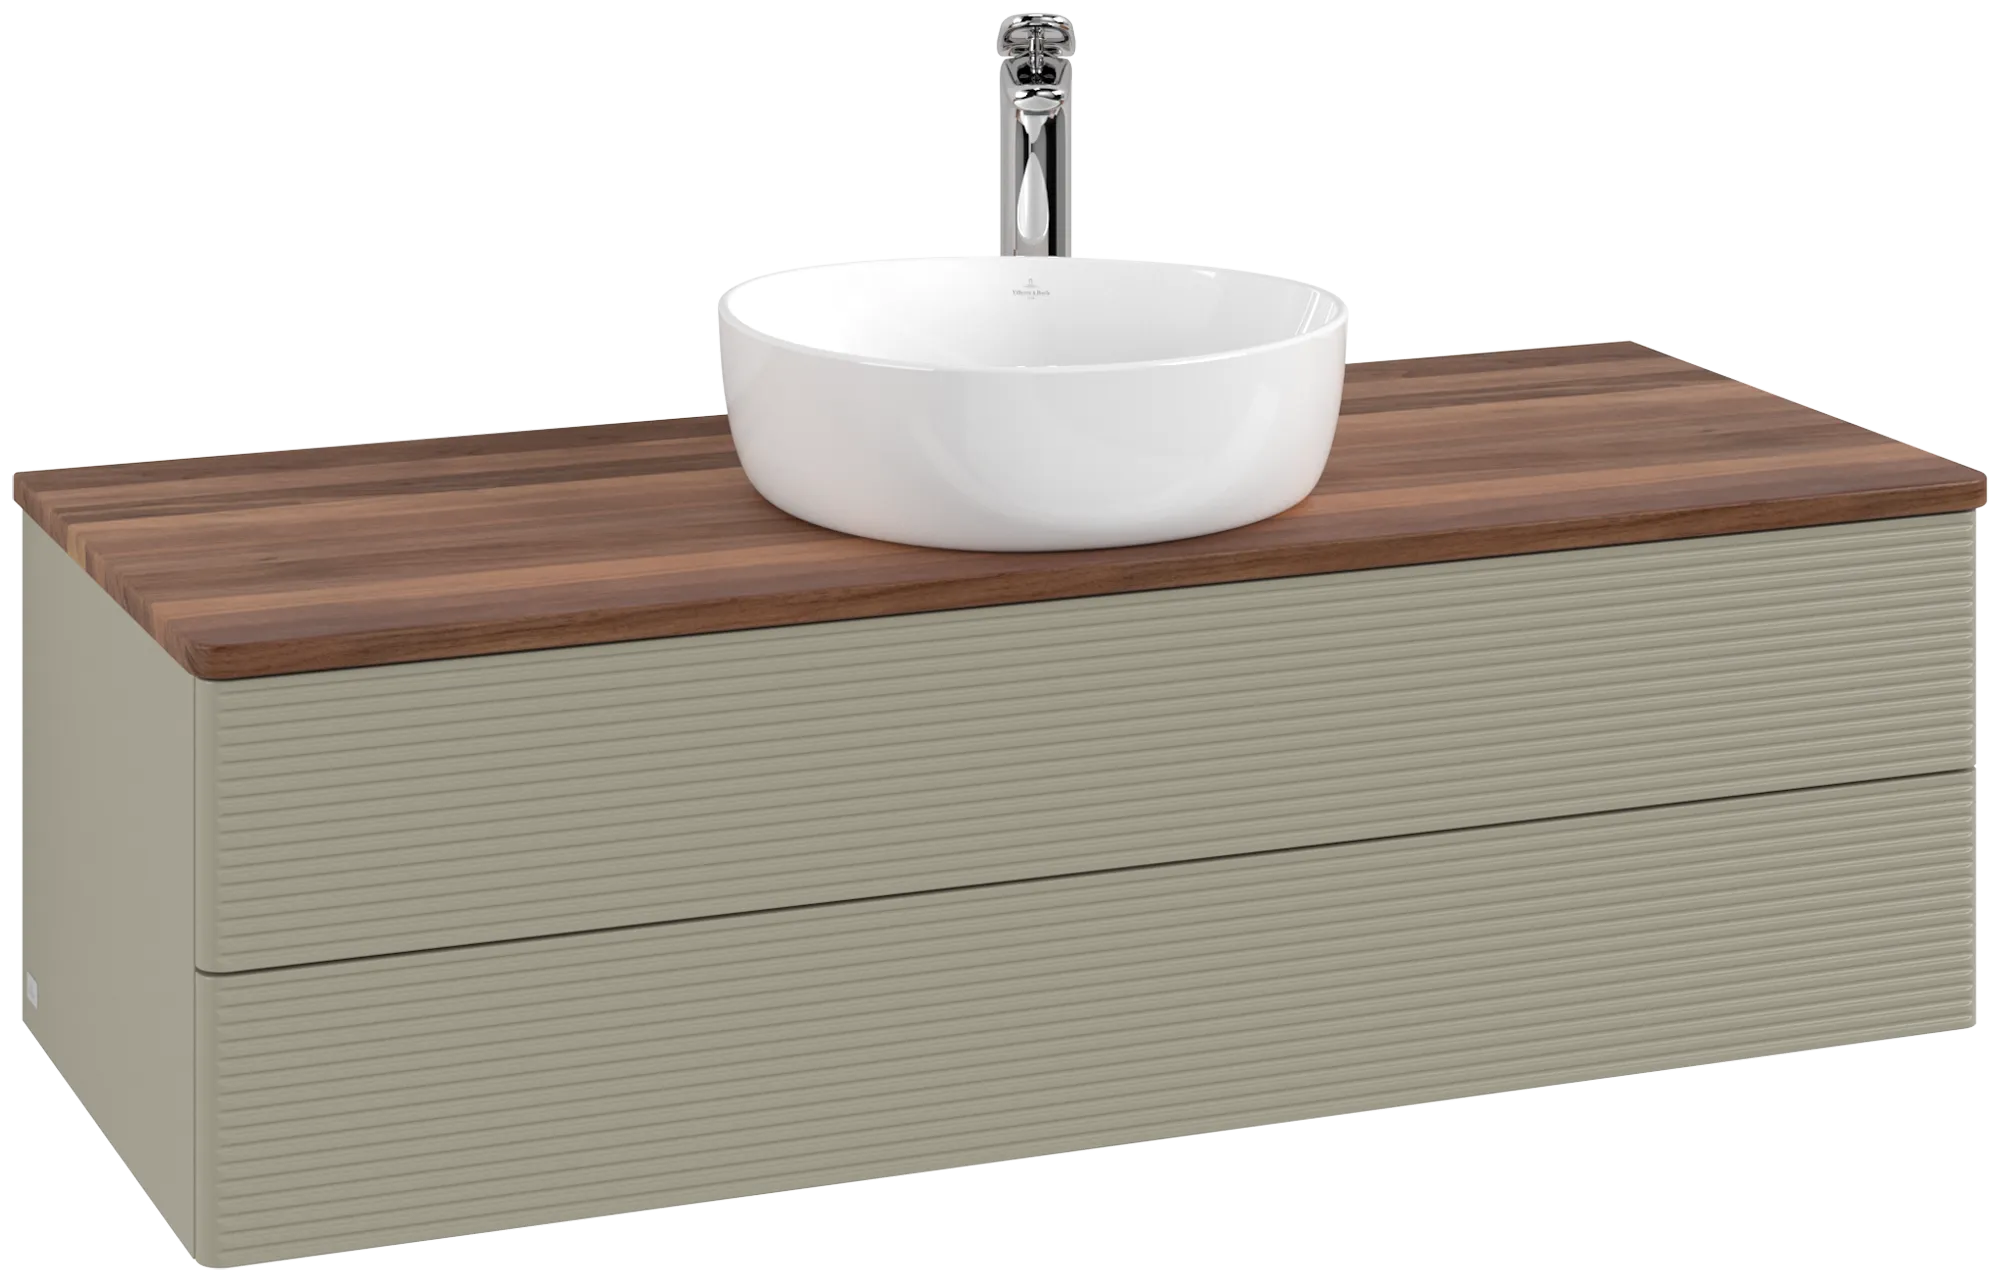 Picture of VILLEROY BOCH Antao Vanity unit, 2 pull-out compartments, 1200 x 360 x 500 mm, Front with grain texture, Stone Grey Matt Lacquer / Warm Walnut #K21152HK